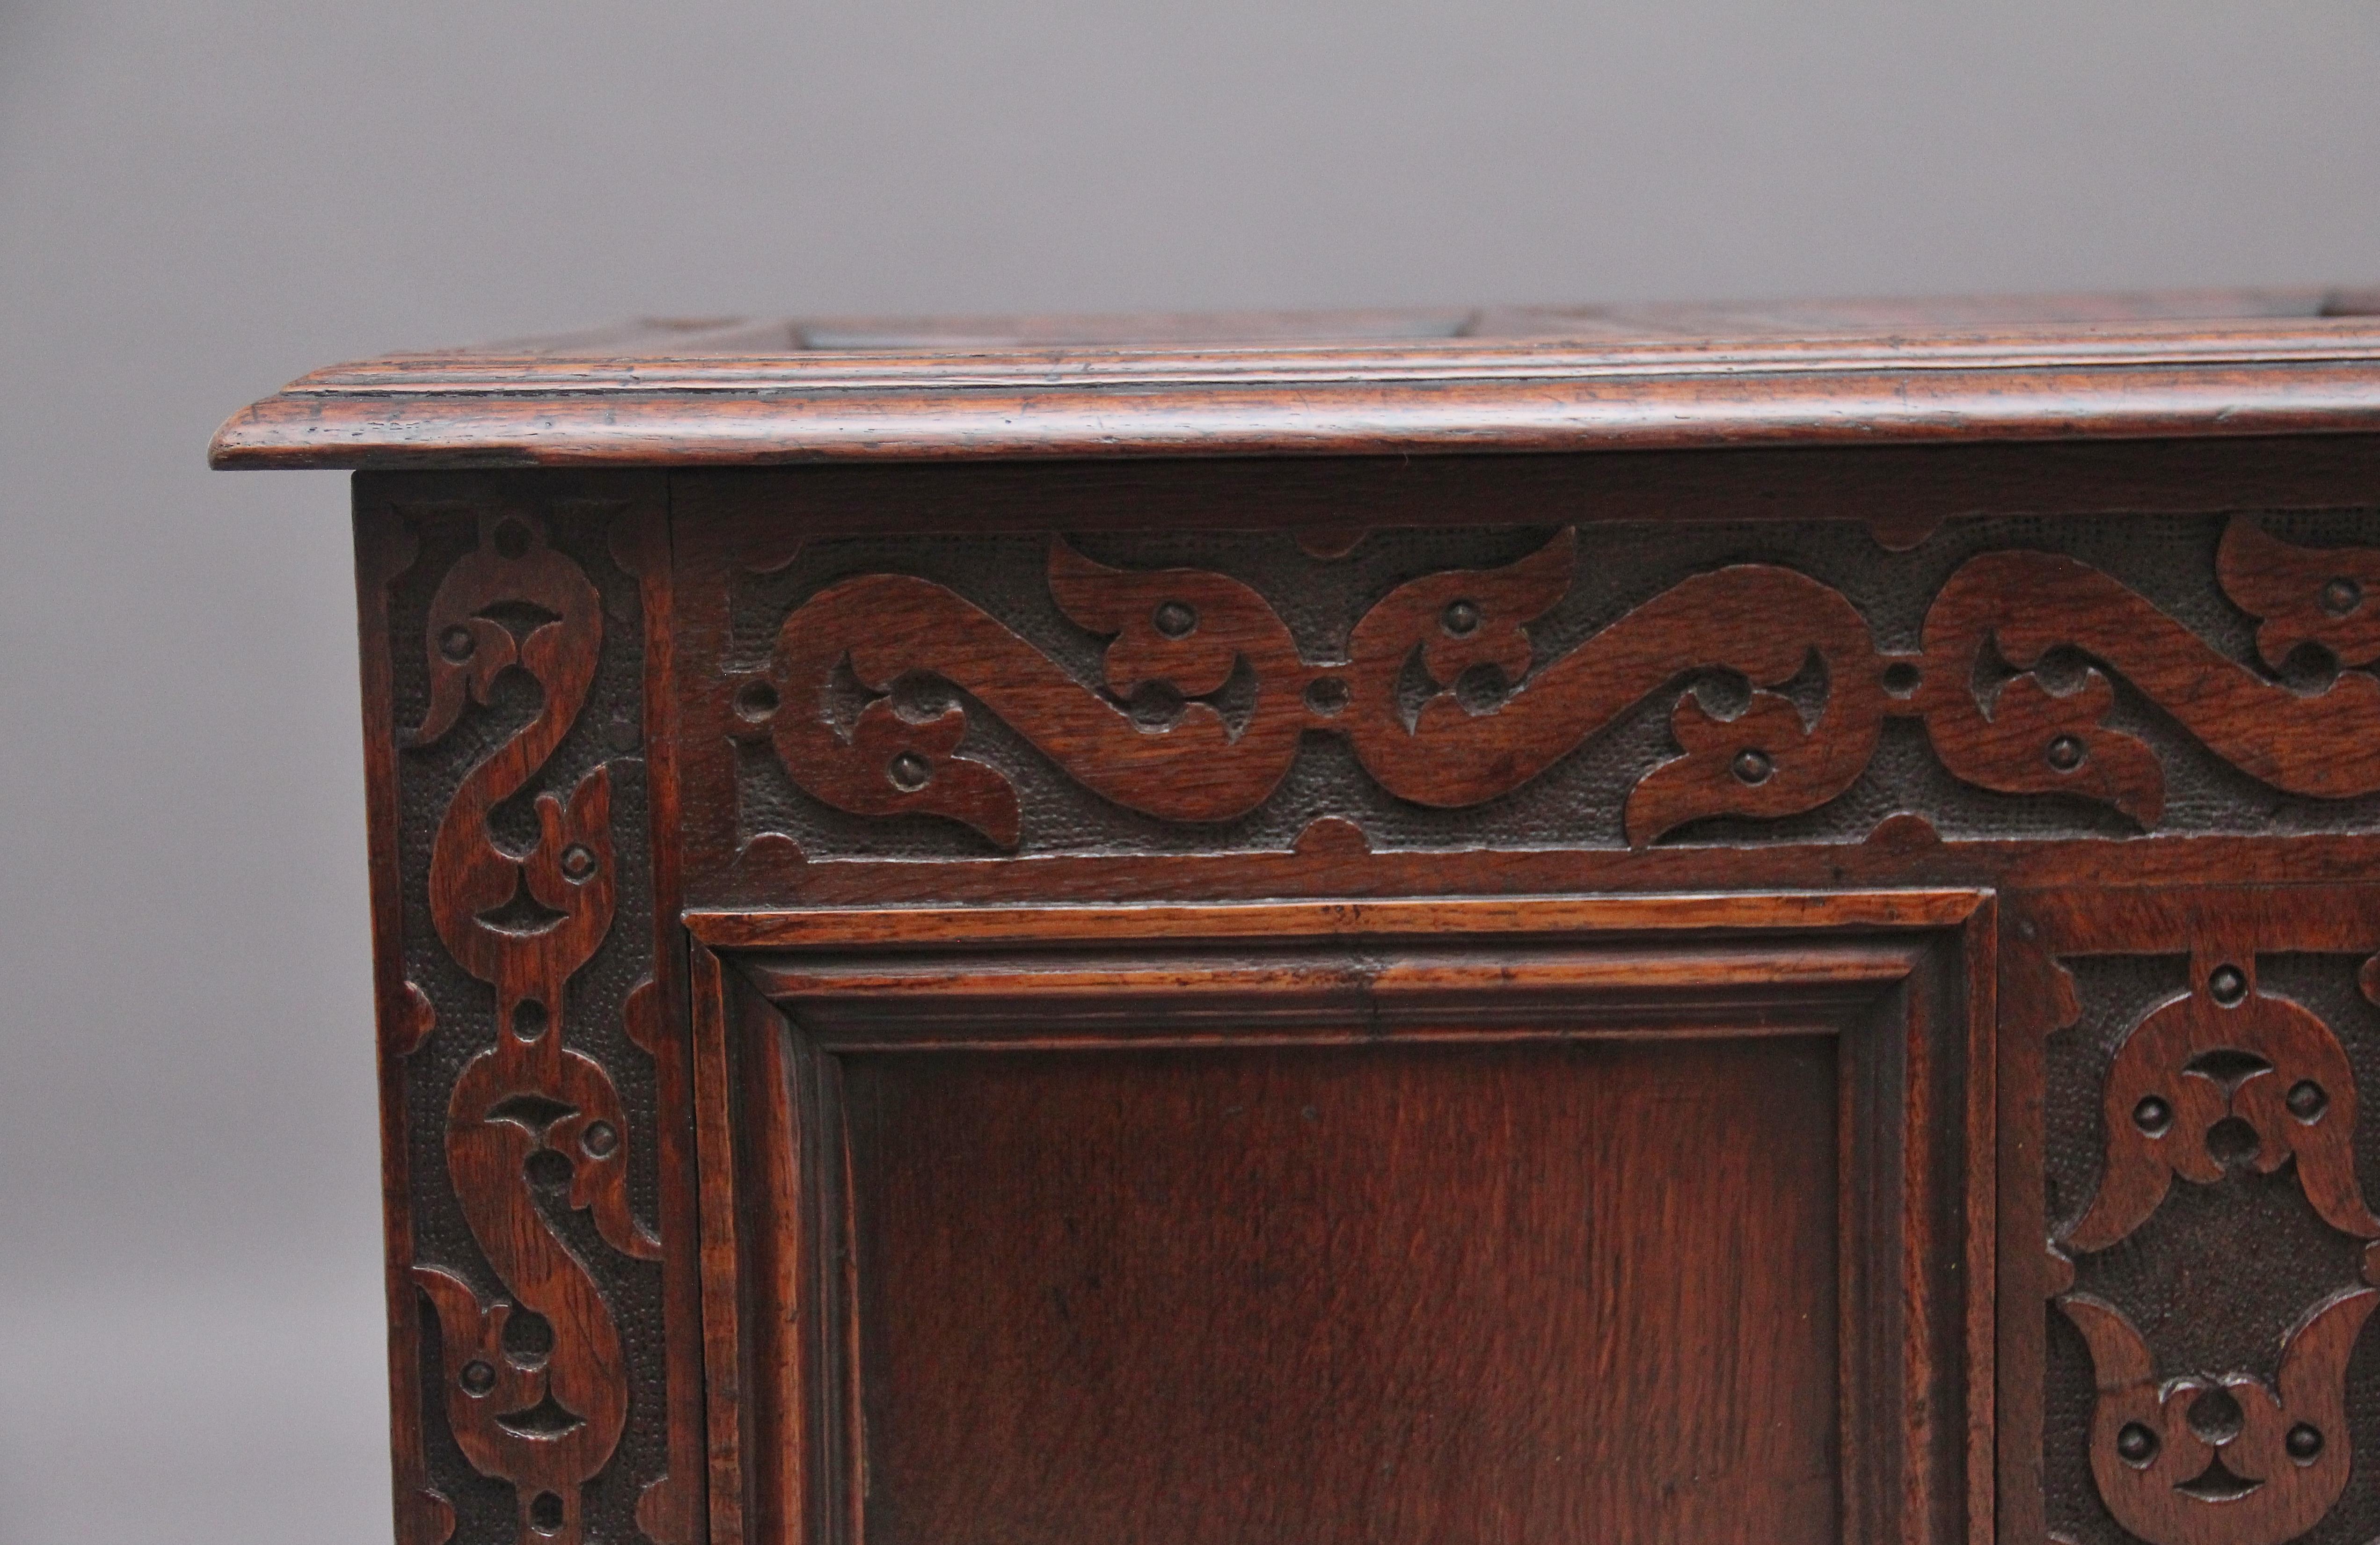 18th Century oak coffer with the moulded edge hinged four panelled top opening to reveal a large compartment space, the three panelled front having wonderful decorative carving, panelled sides, standing on square legs. This coffer has a lovely warm